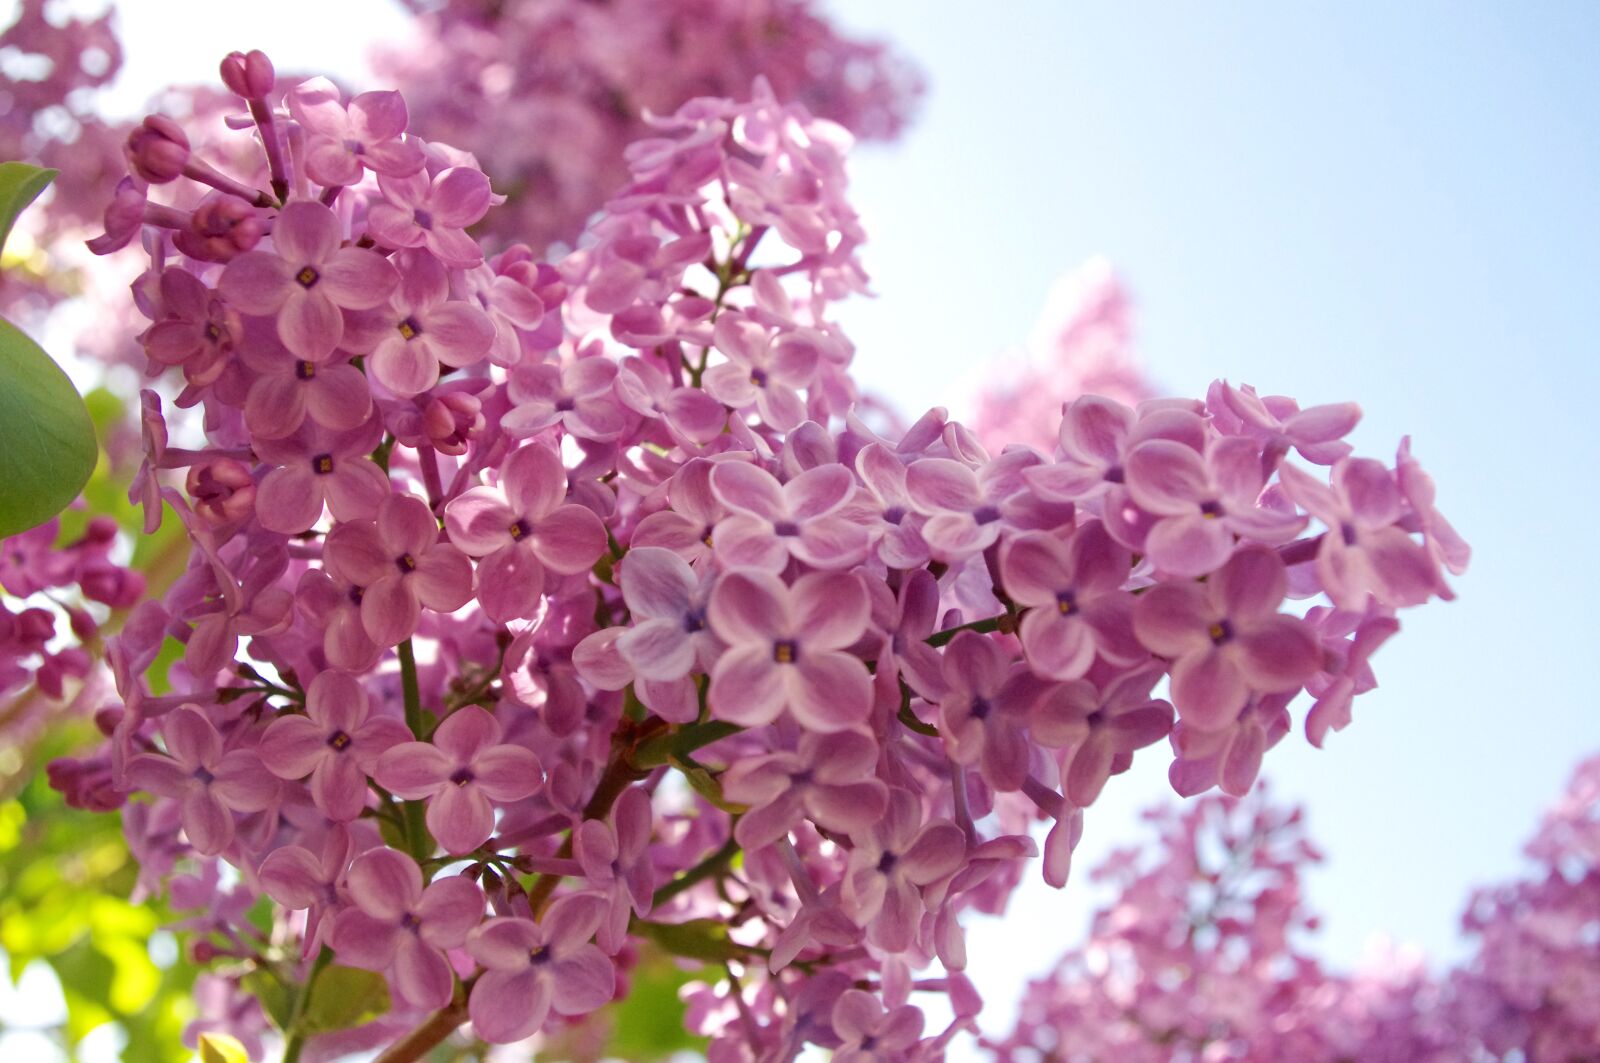 Pentax K-r sample photo. Lilac, flowers, bloom photography